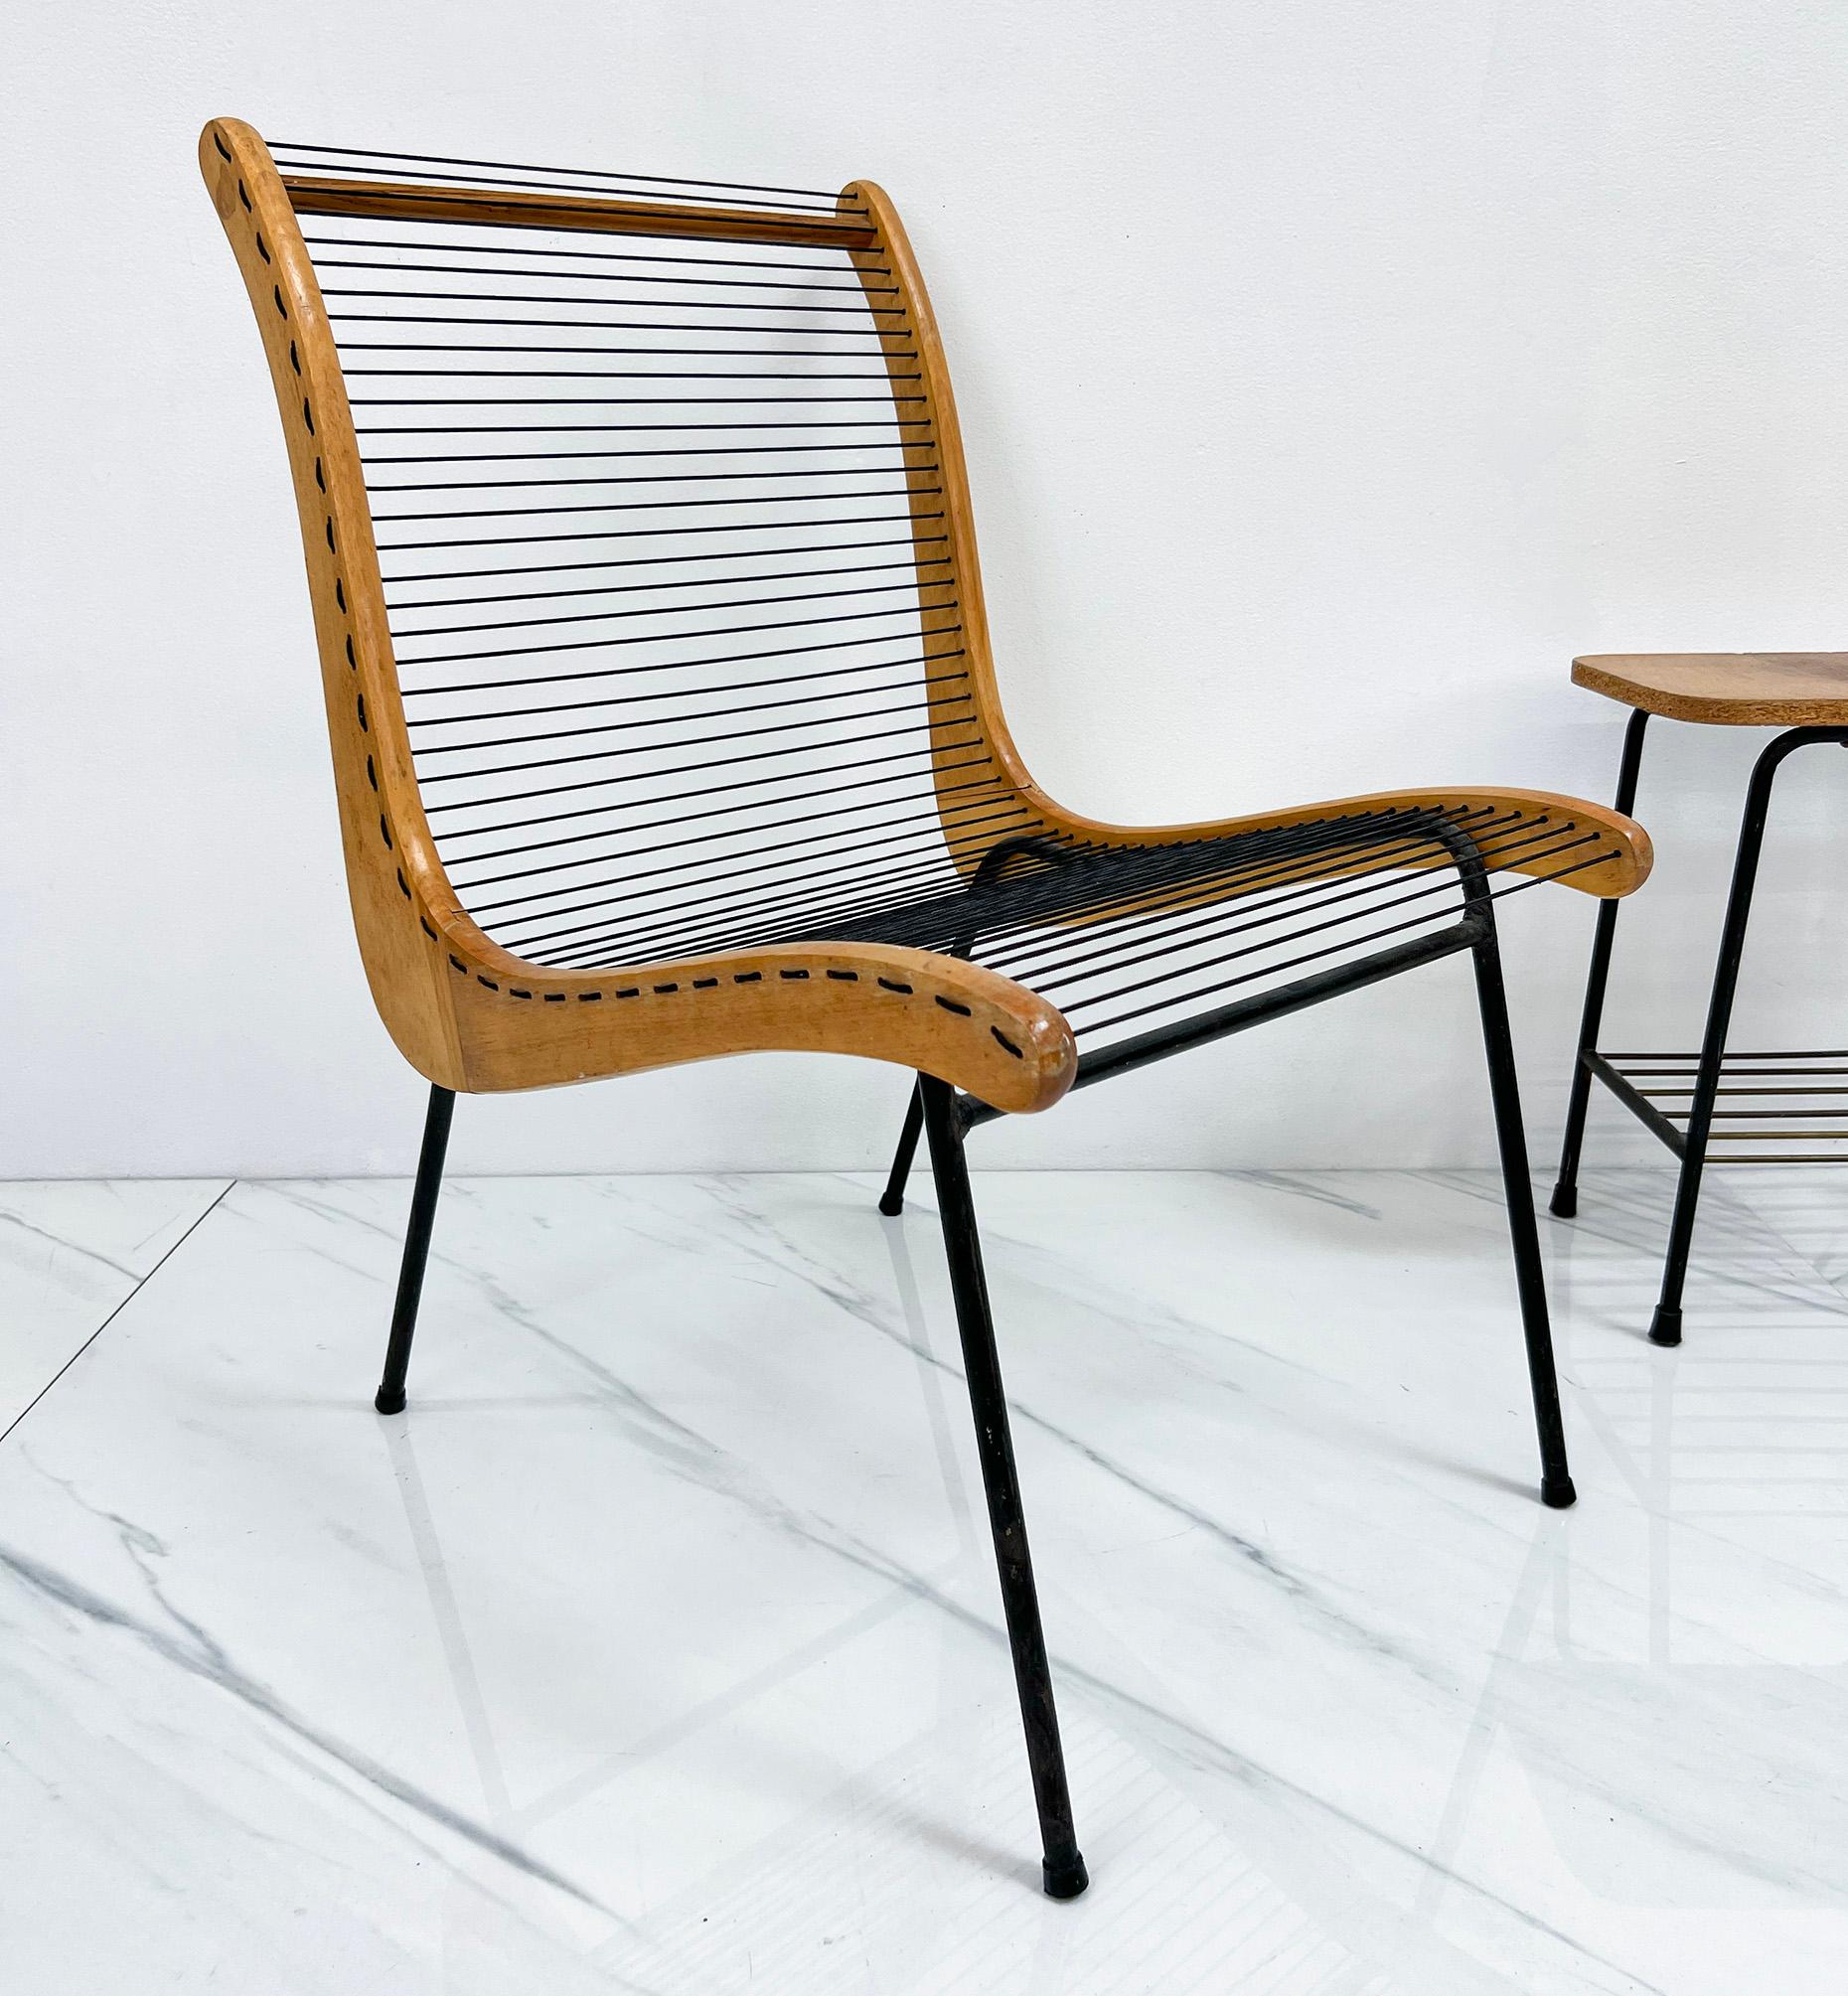 String Chairs With Matching Table by Carl Koch, Vermont Tubbs, 1950's For Sale 2